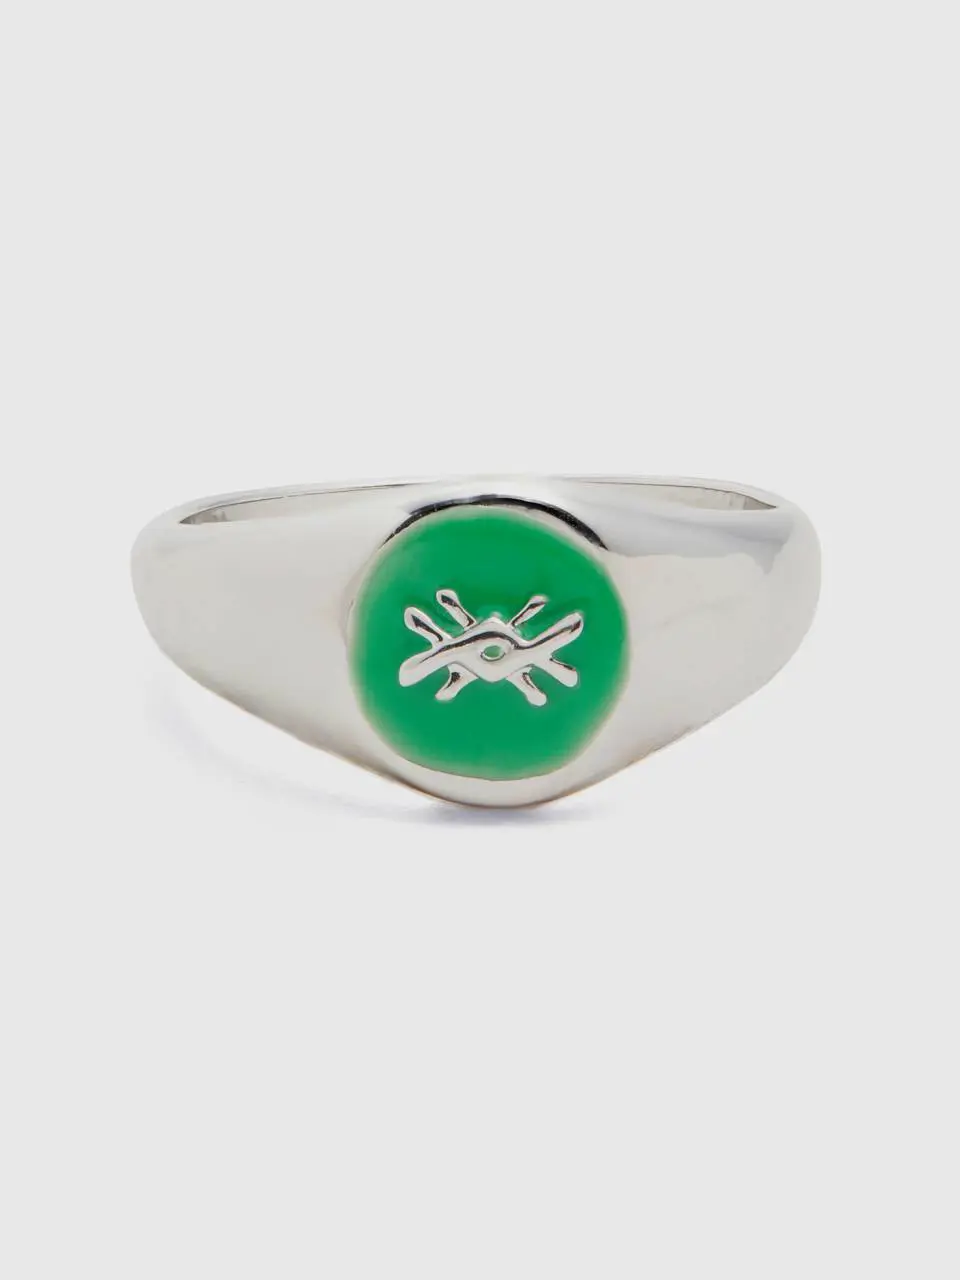 Benetton green ring with logo. 1